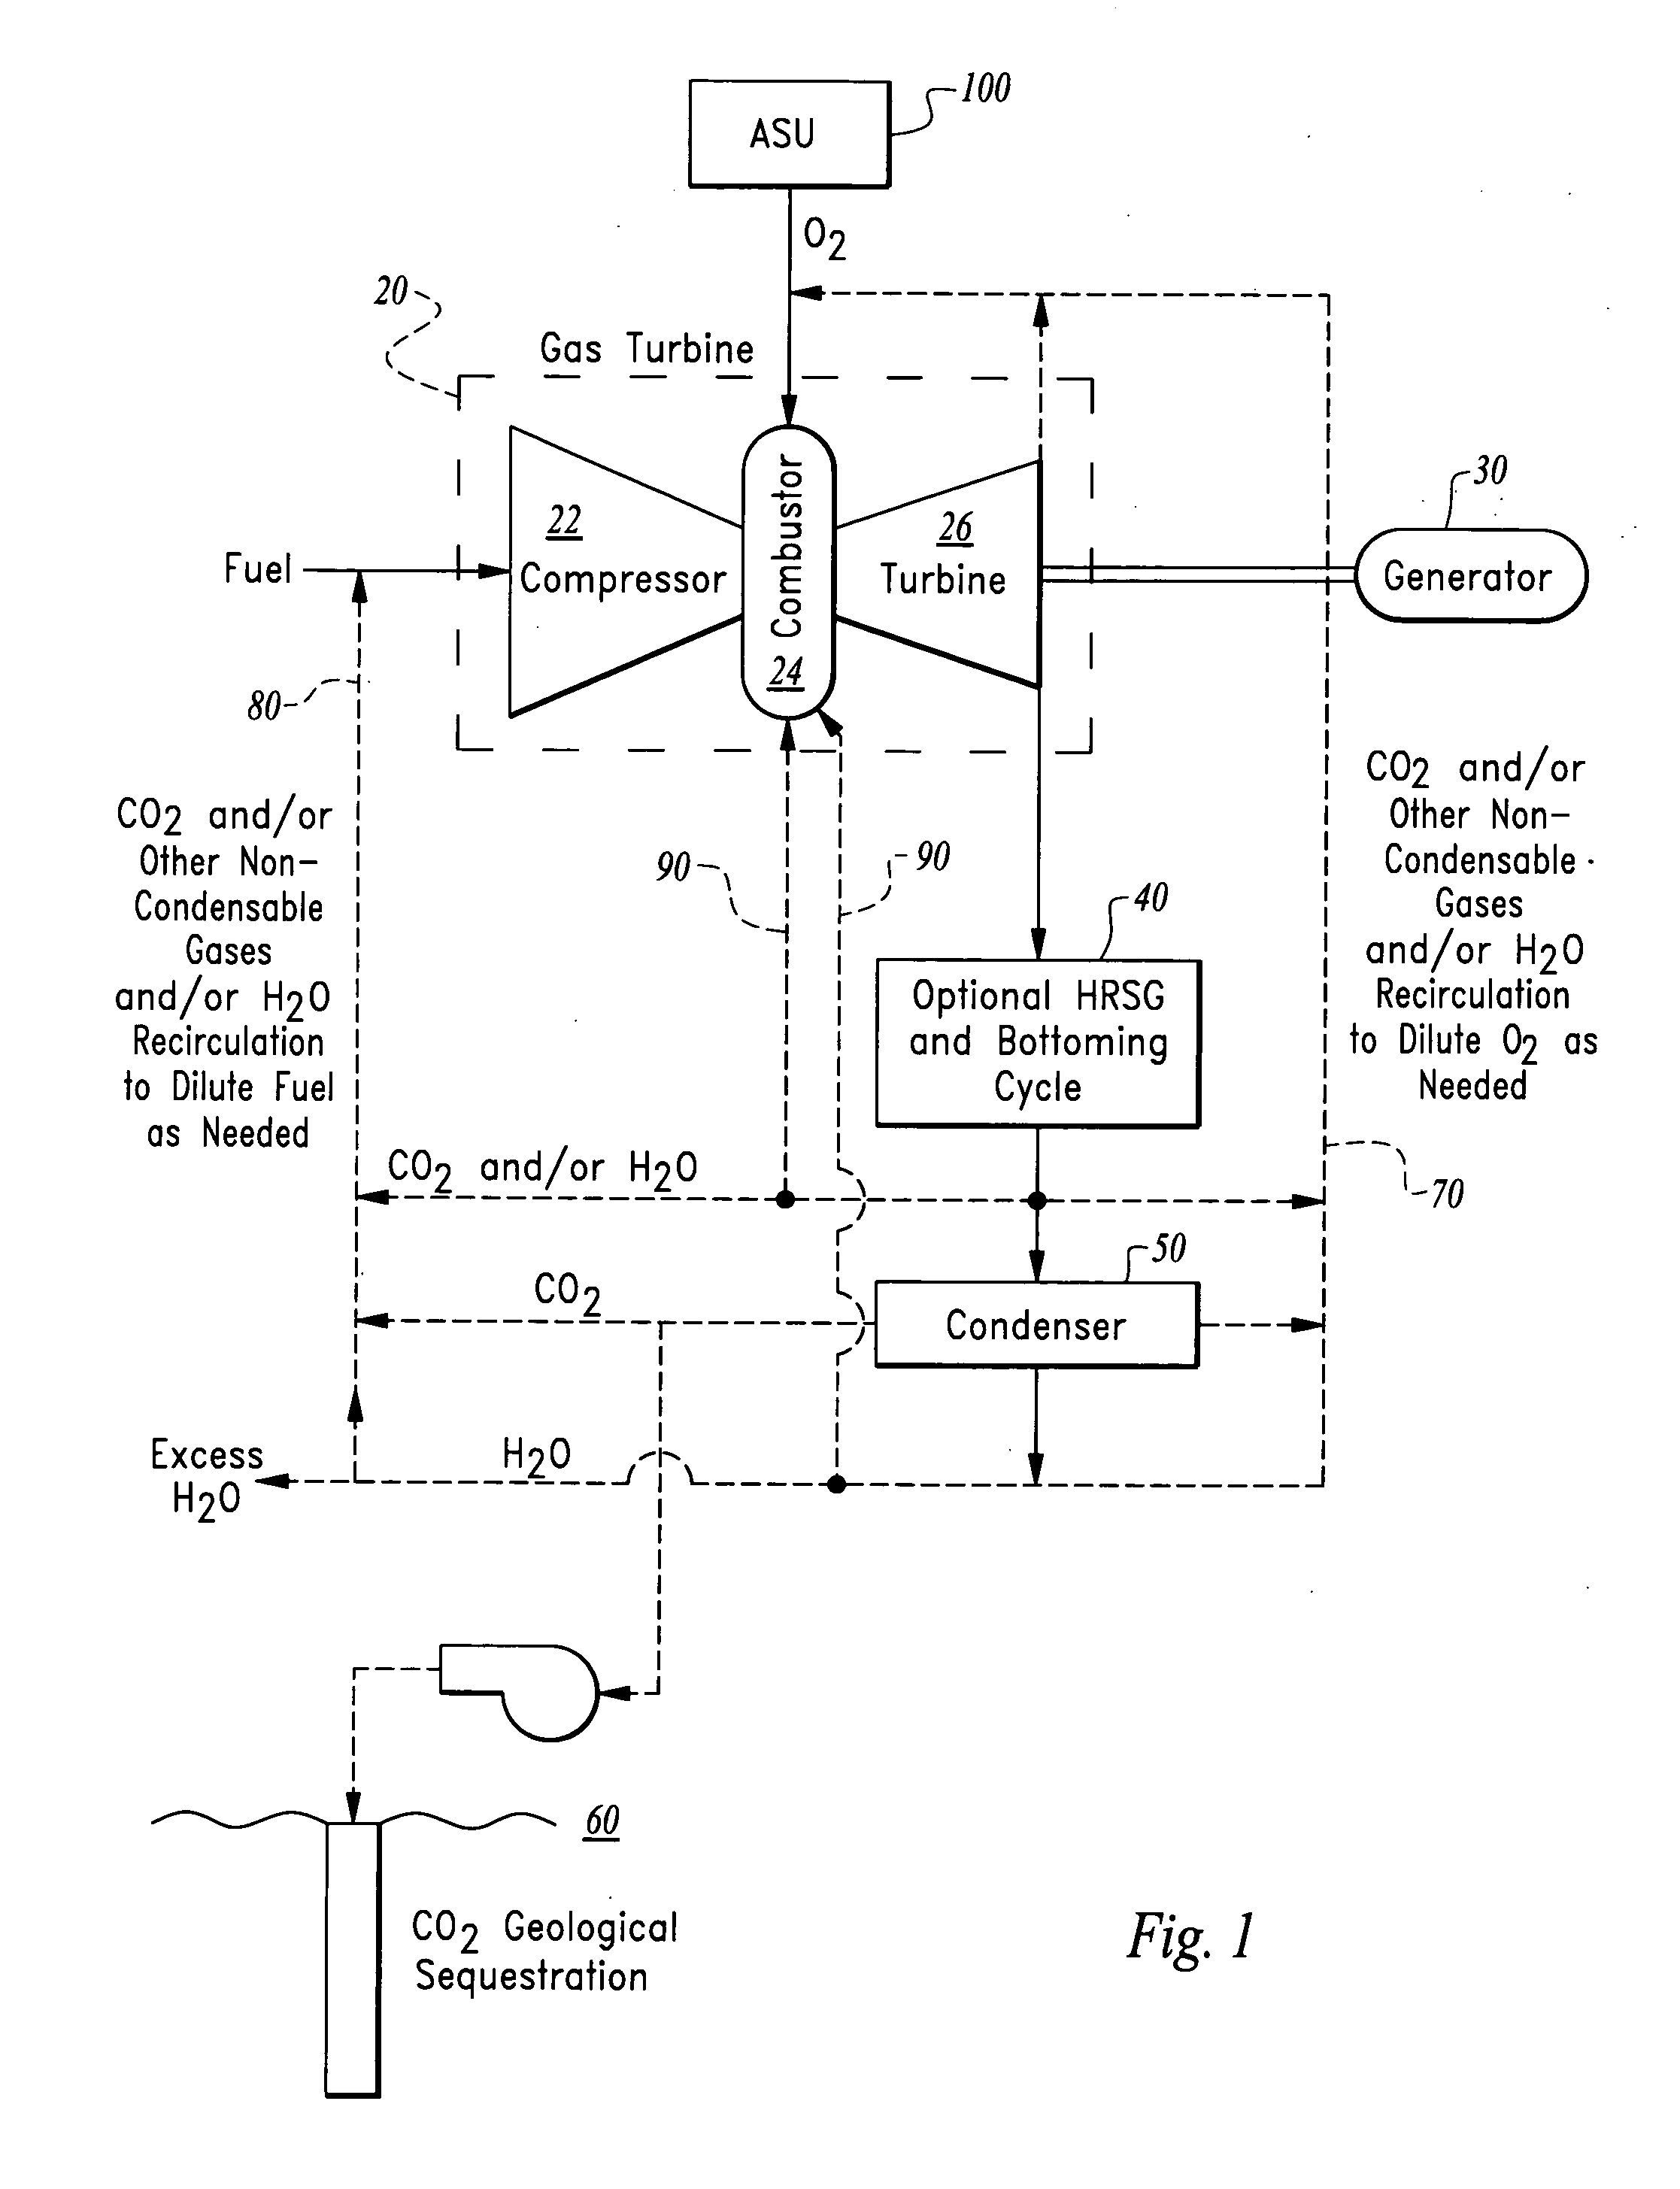 Methods of oxy-combustion power generation using low heating value fuel